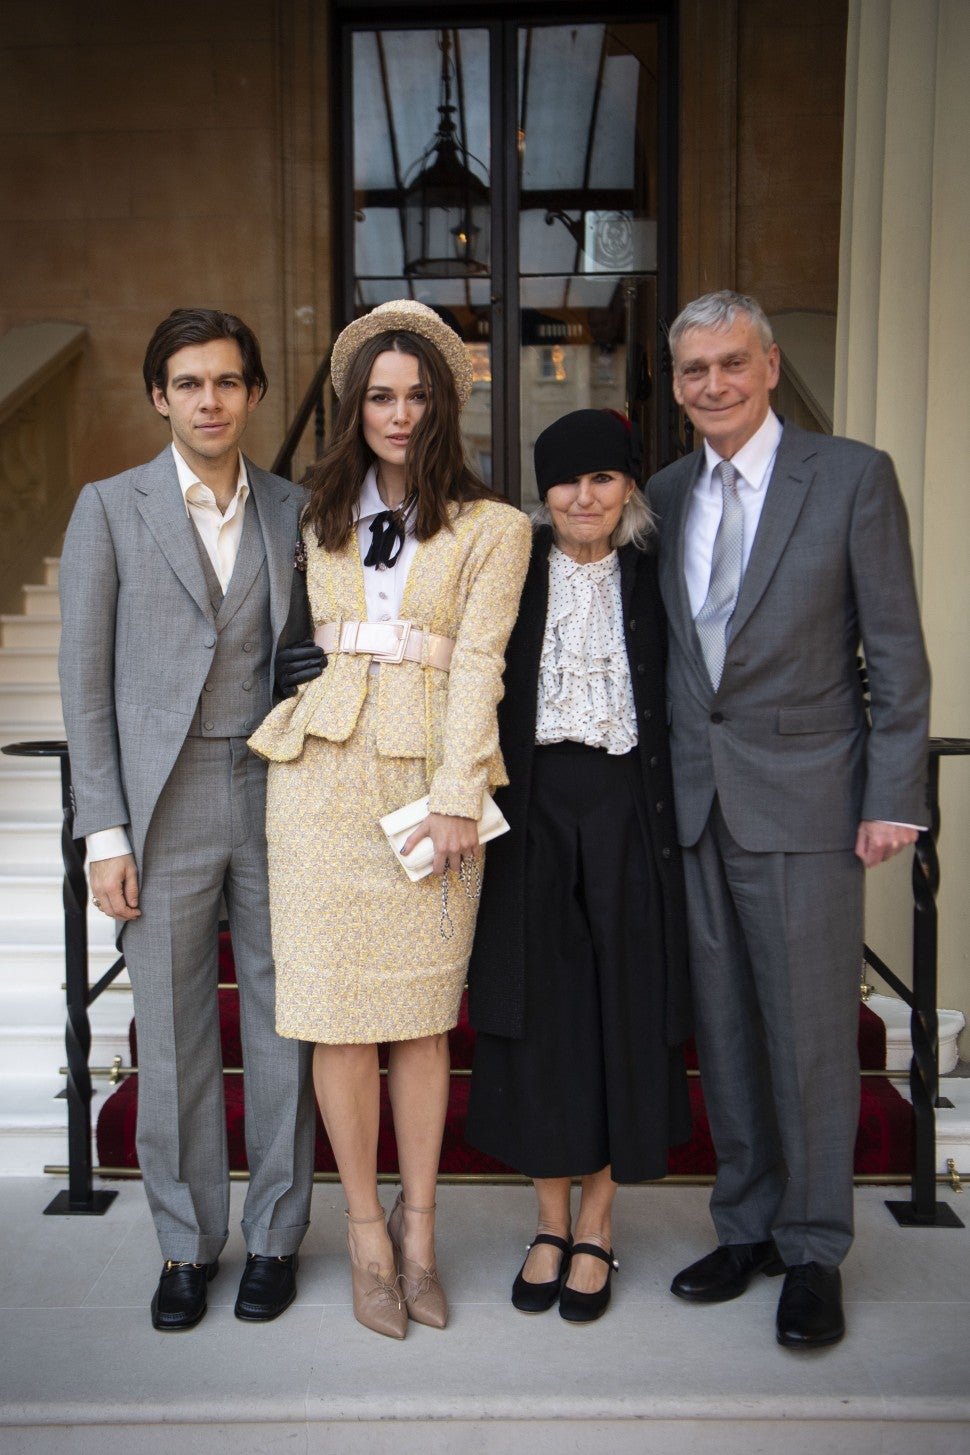 Keira Knightley with husband and parents at OBE ceremony